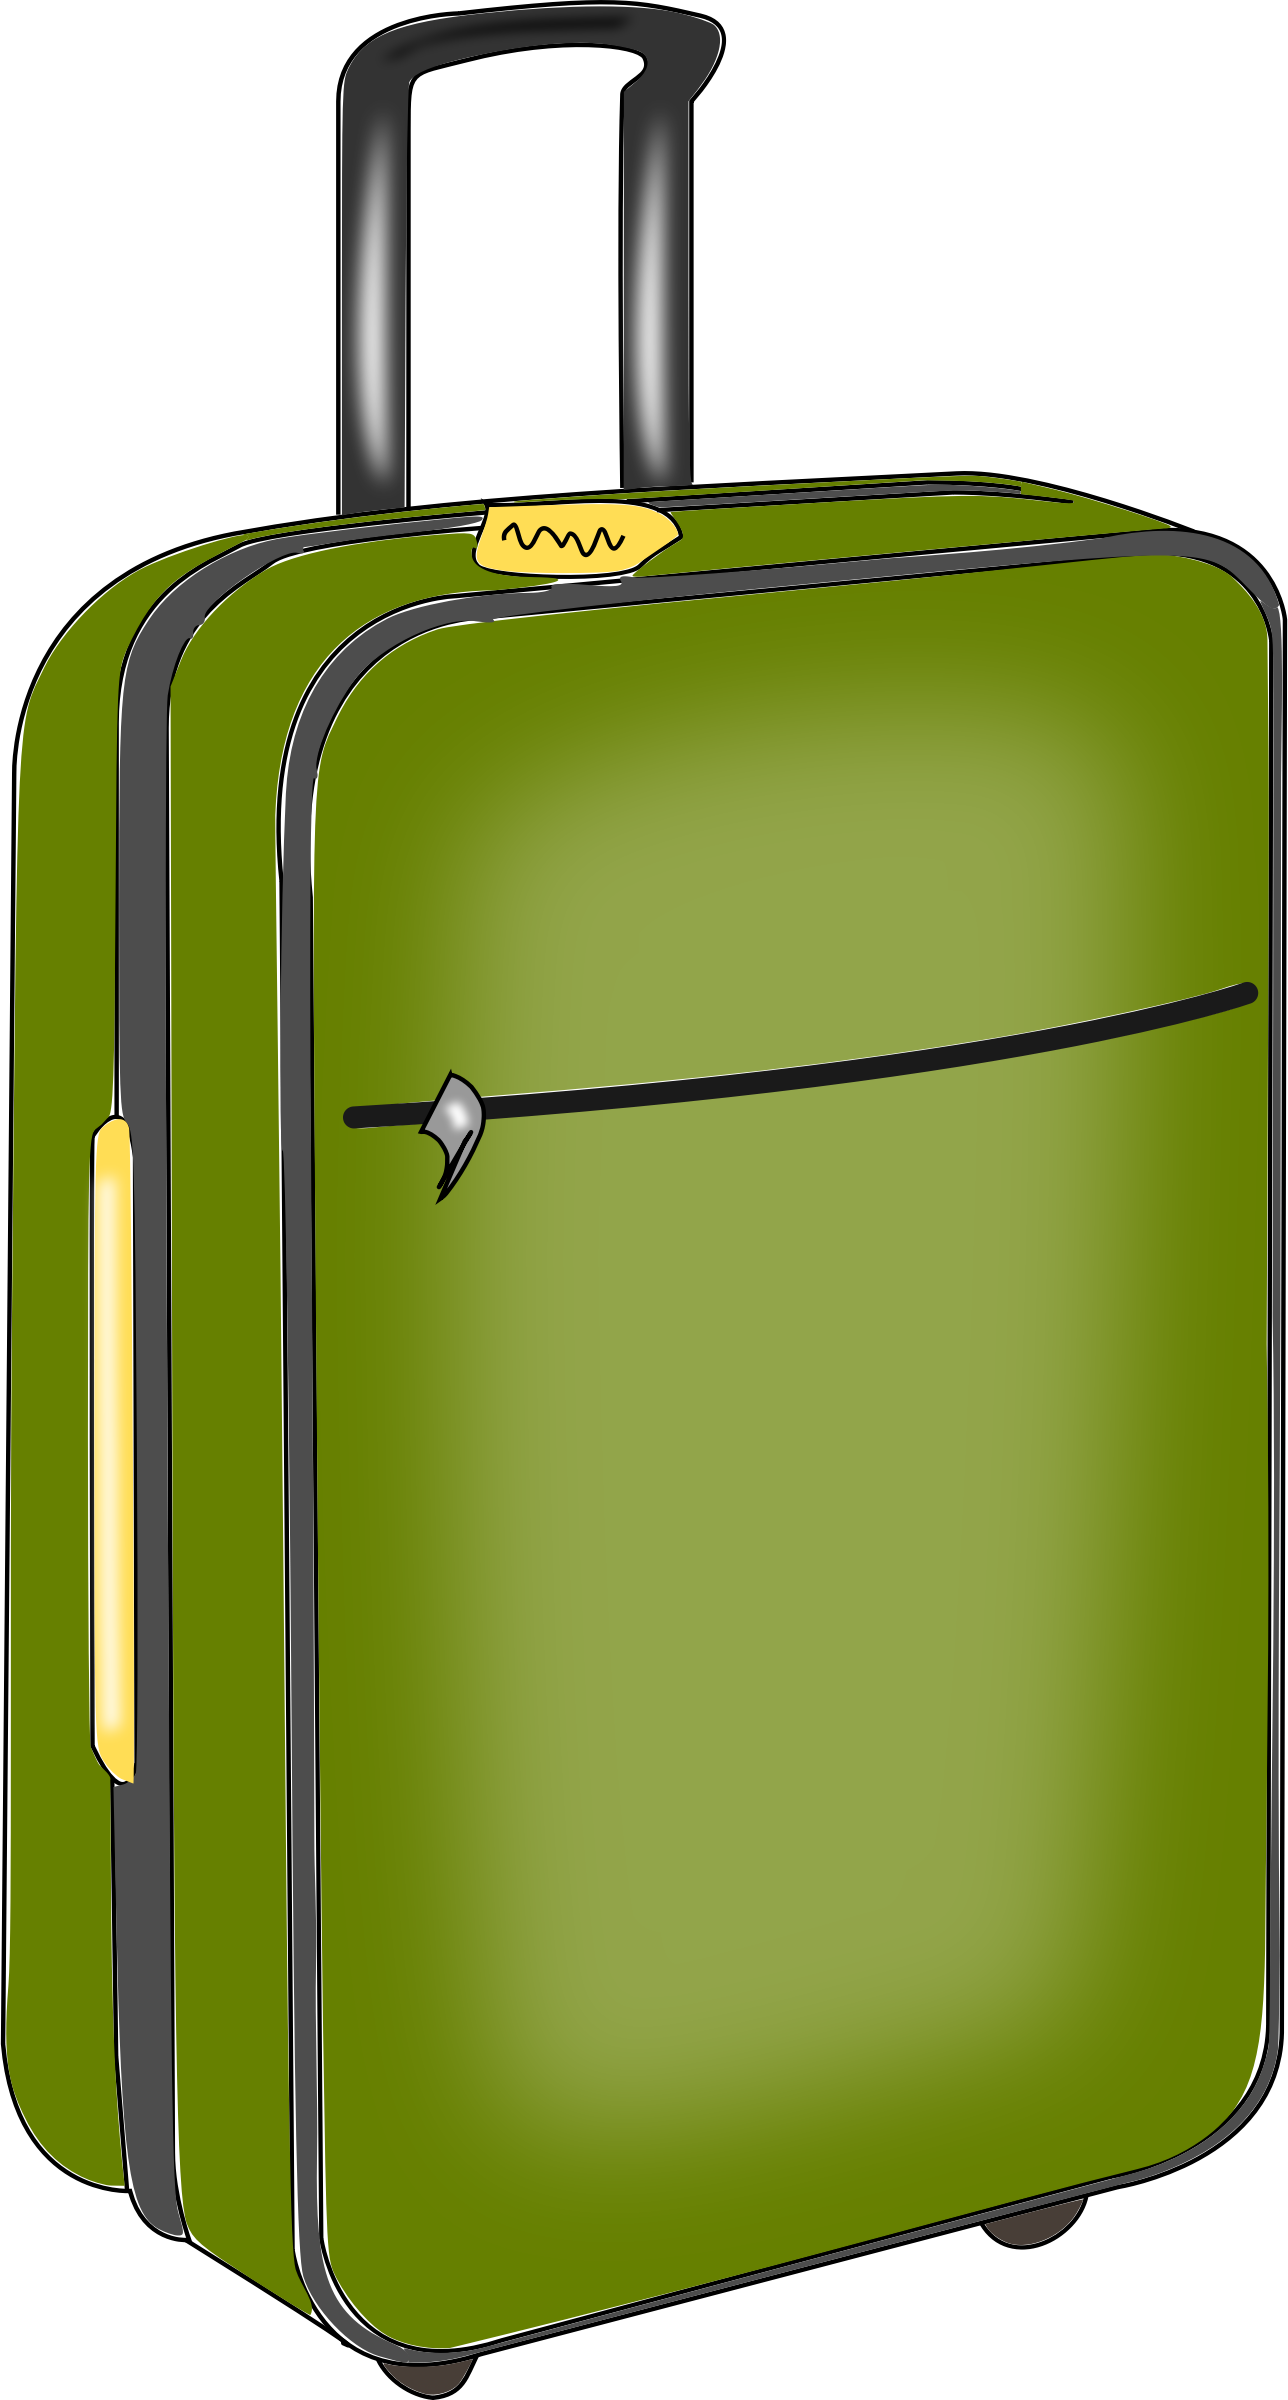 label clipart luggage